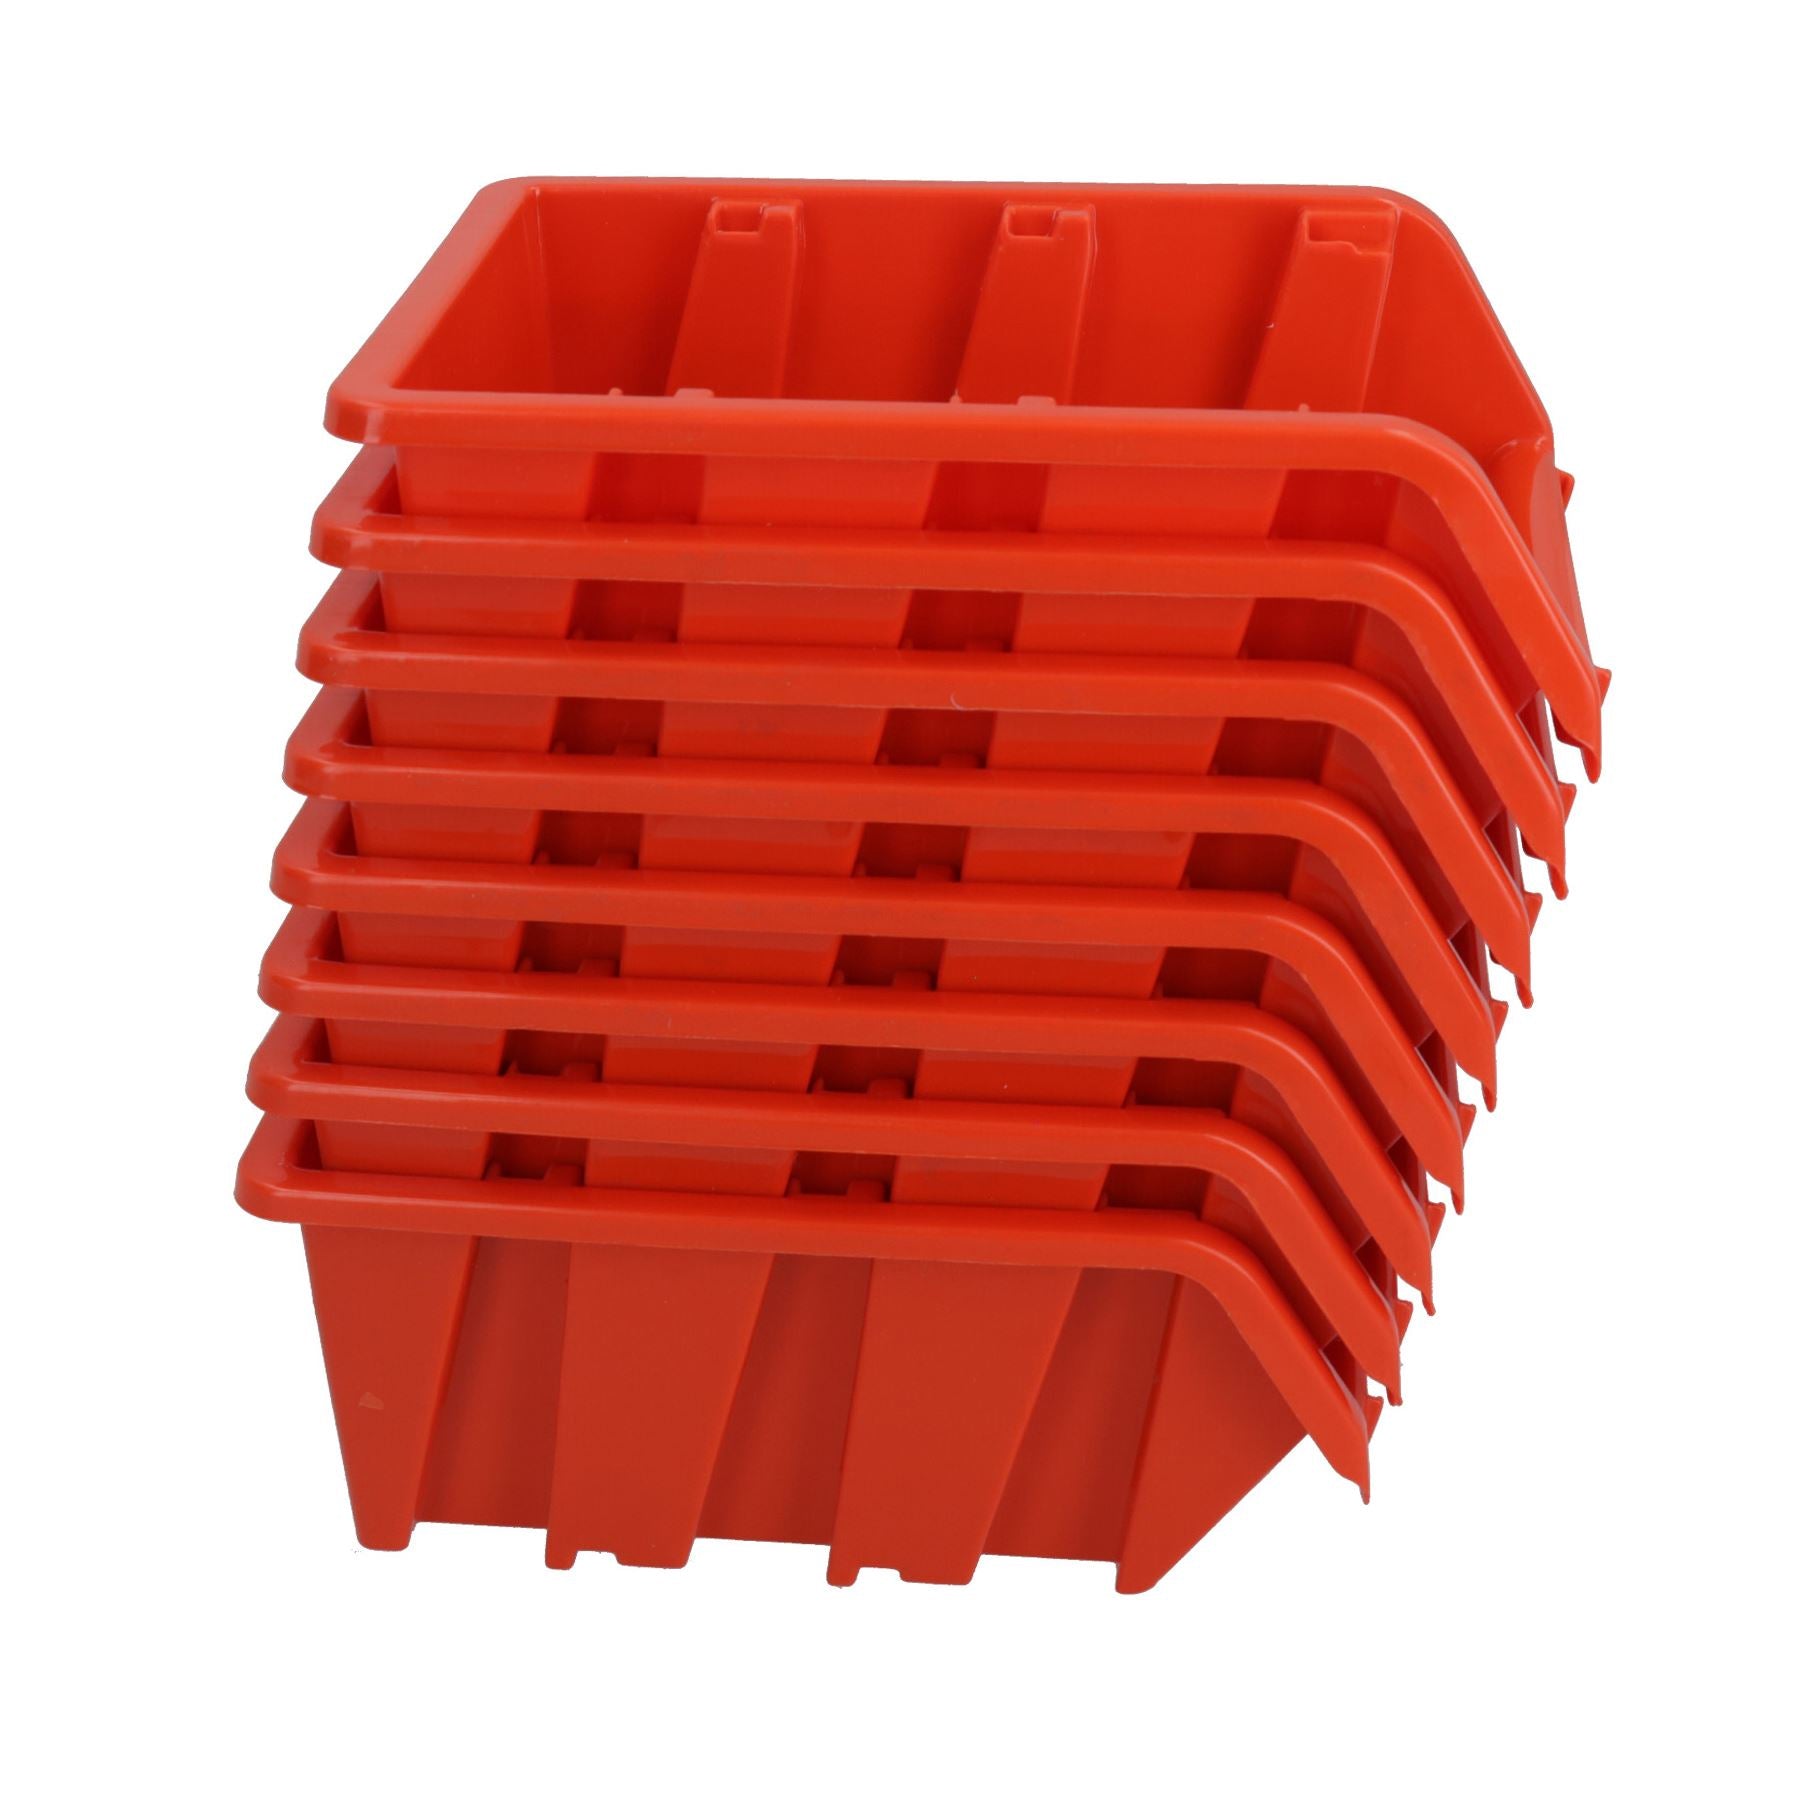 Stacking Bin Boxes Wall or Stack for Garage Workshop Storage 165 x 105 x 75